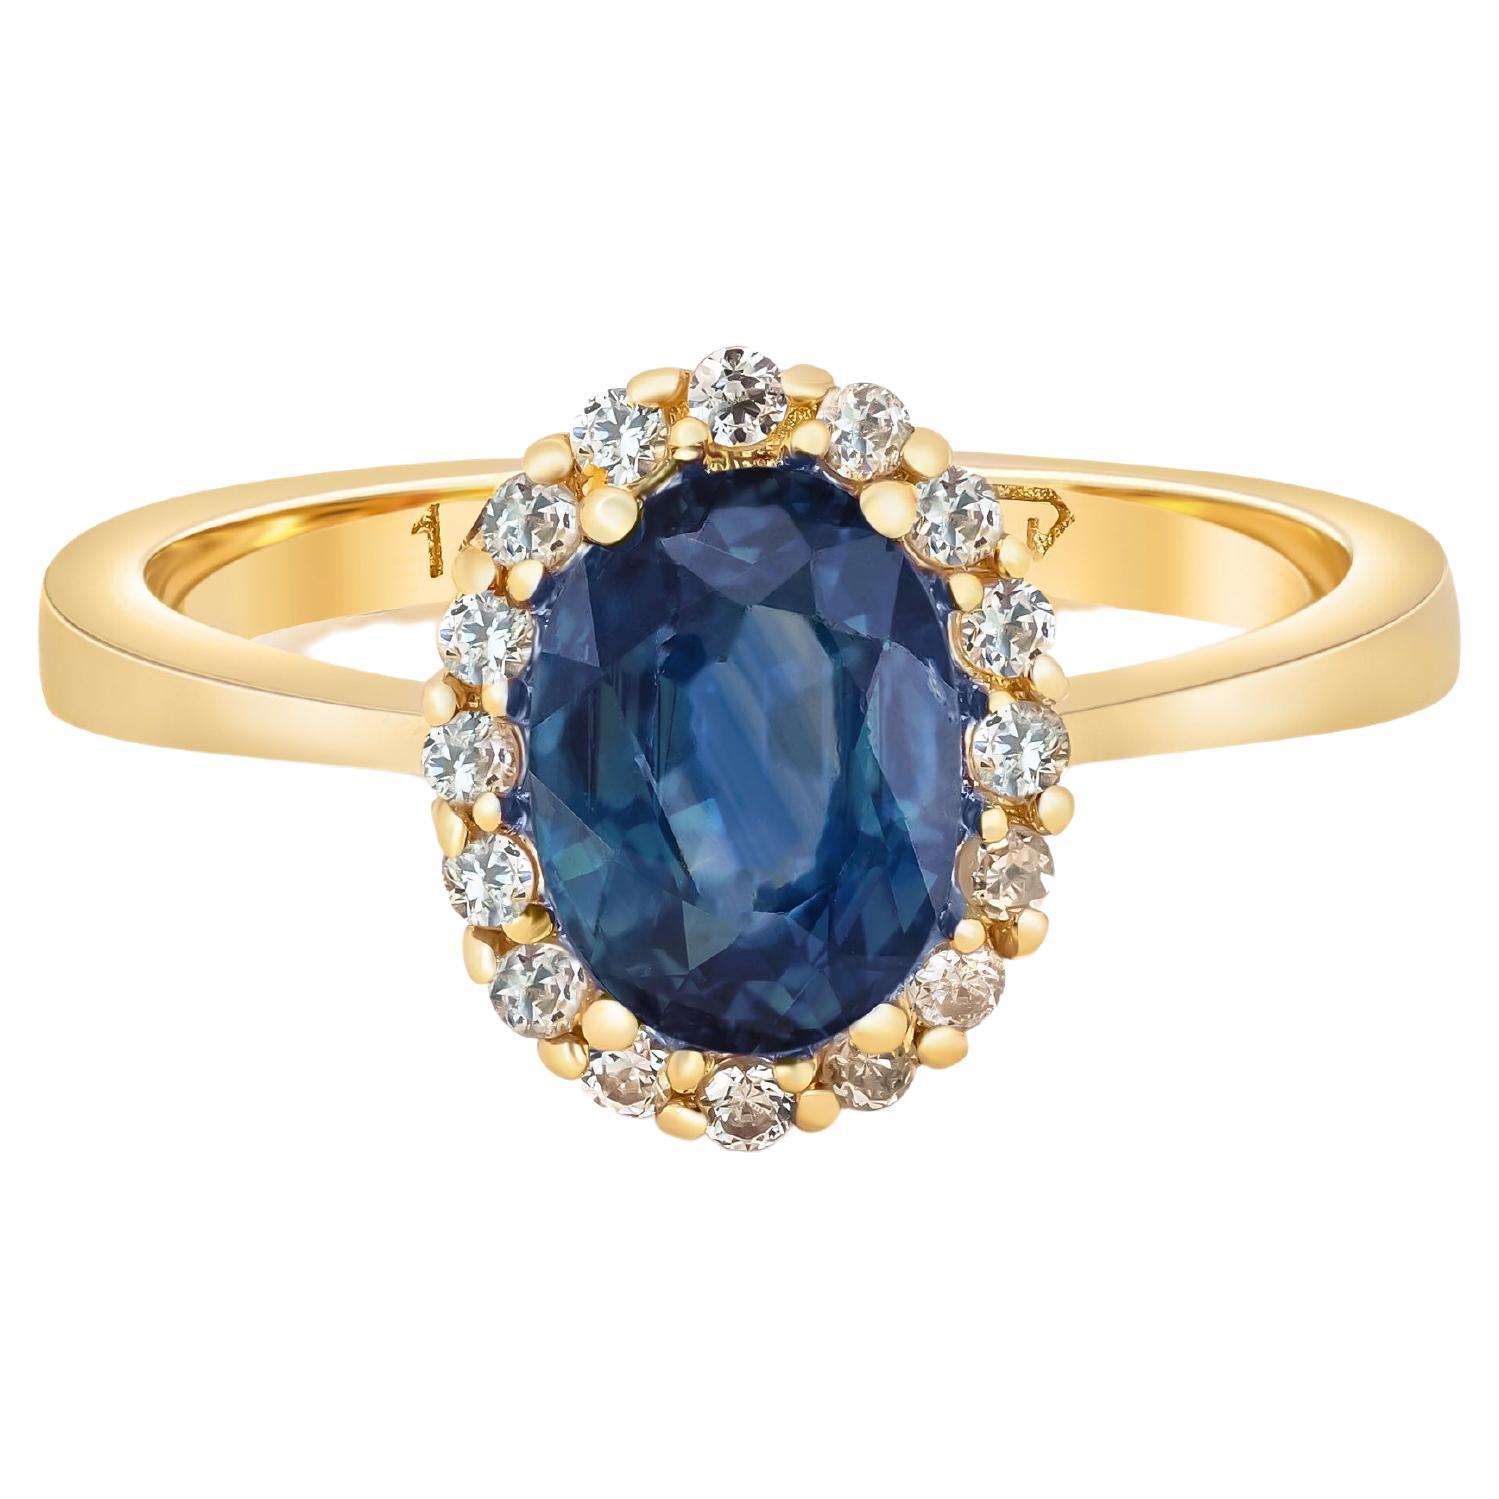 For Sale:  Sapphire ring with diamond halo.